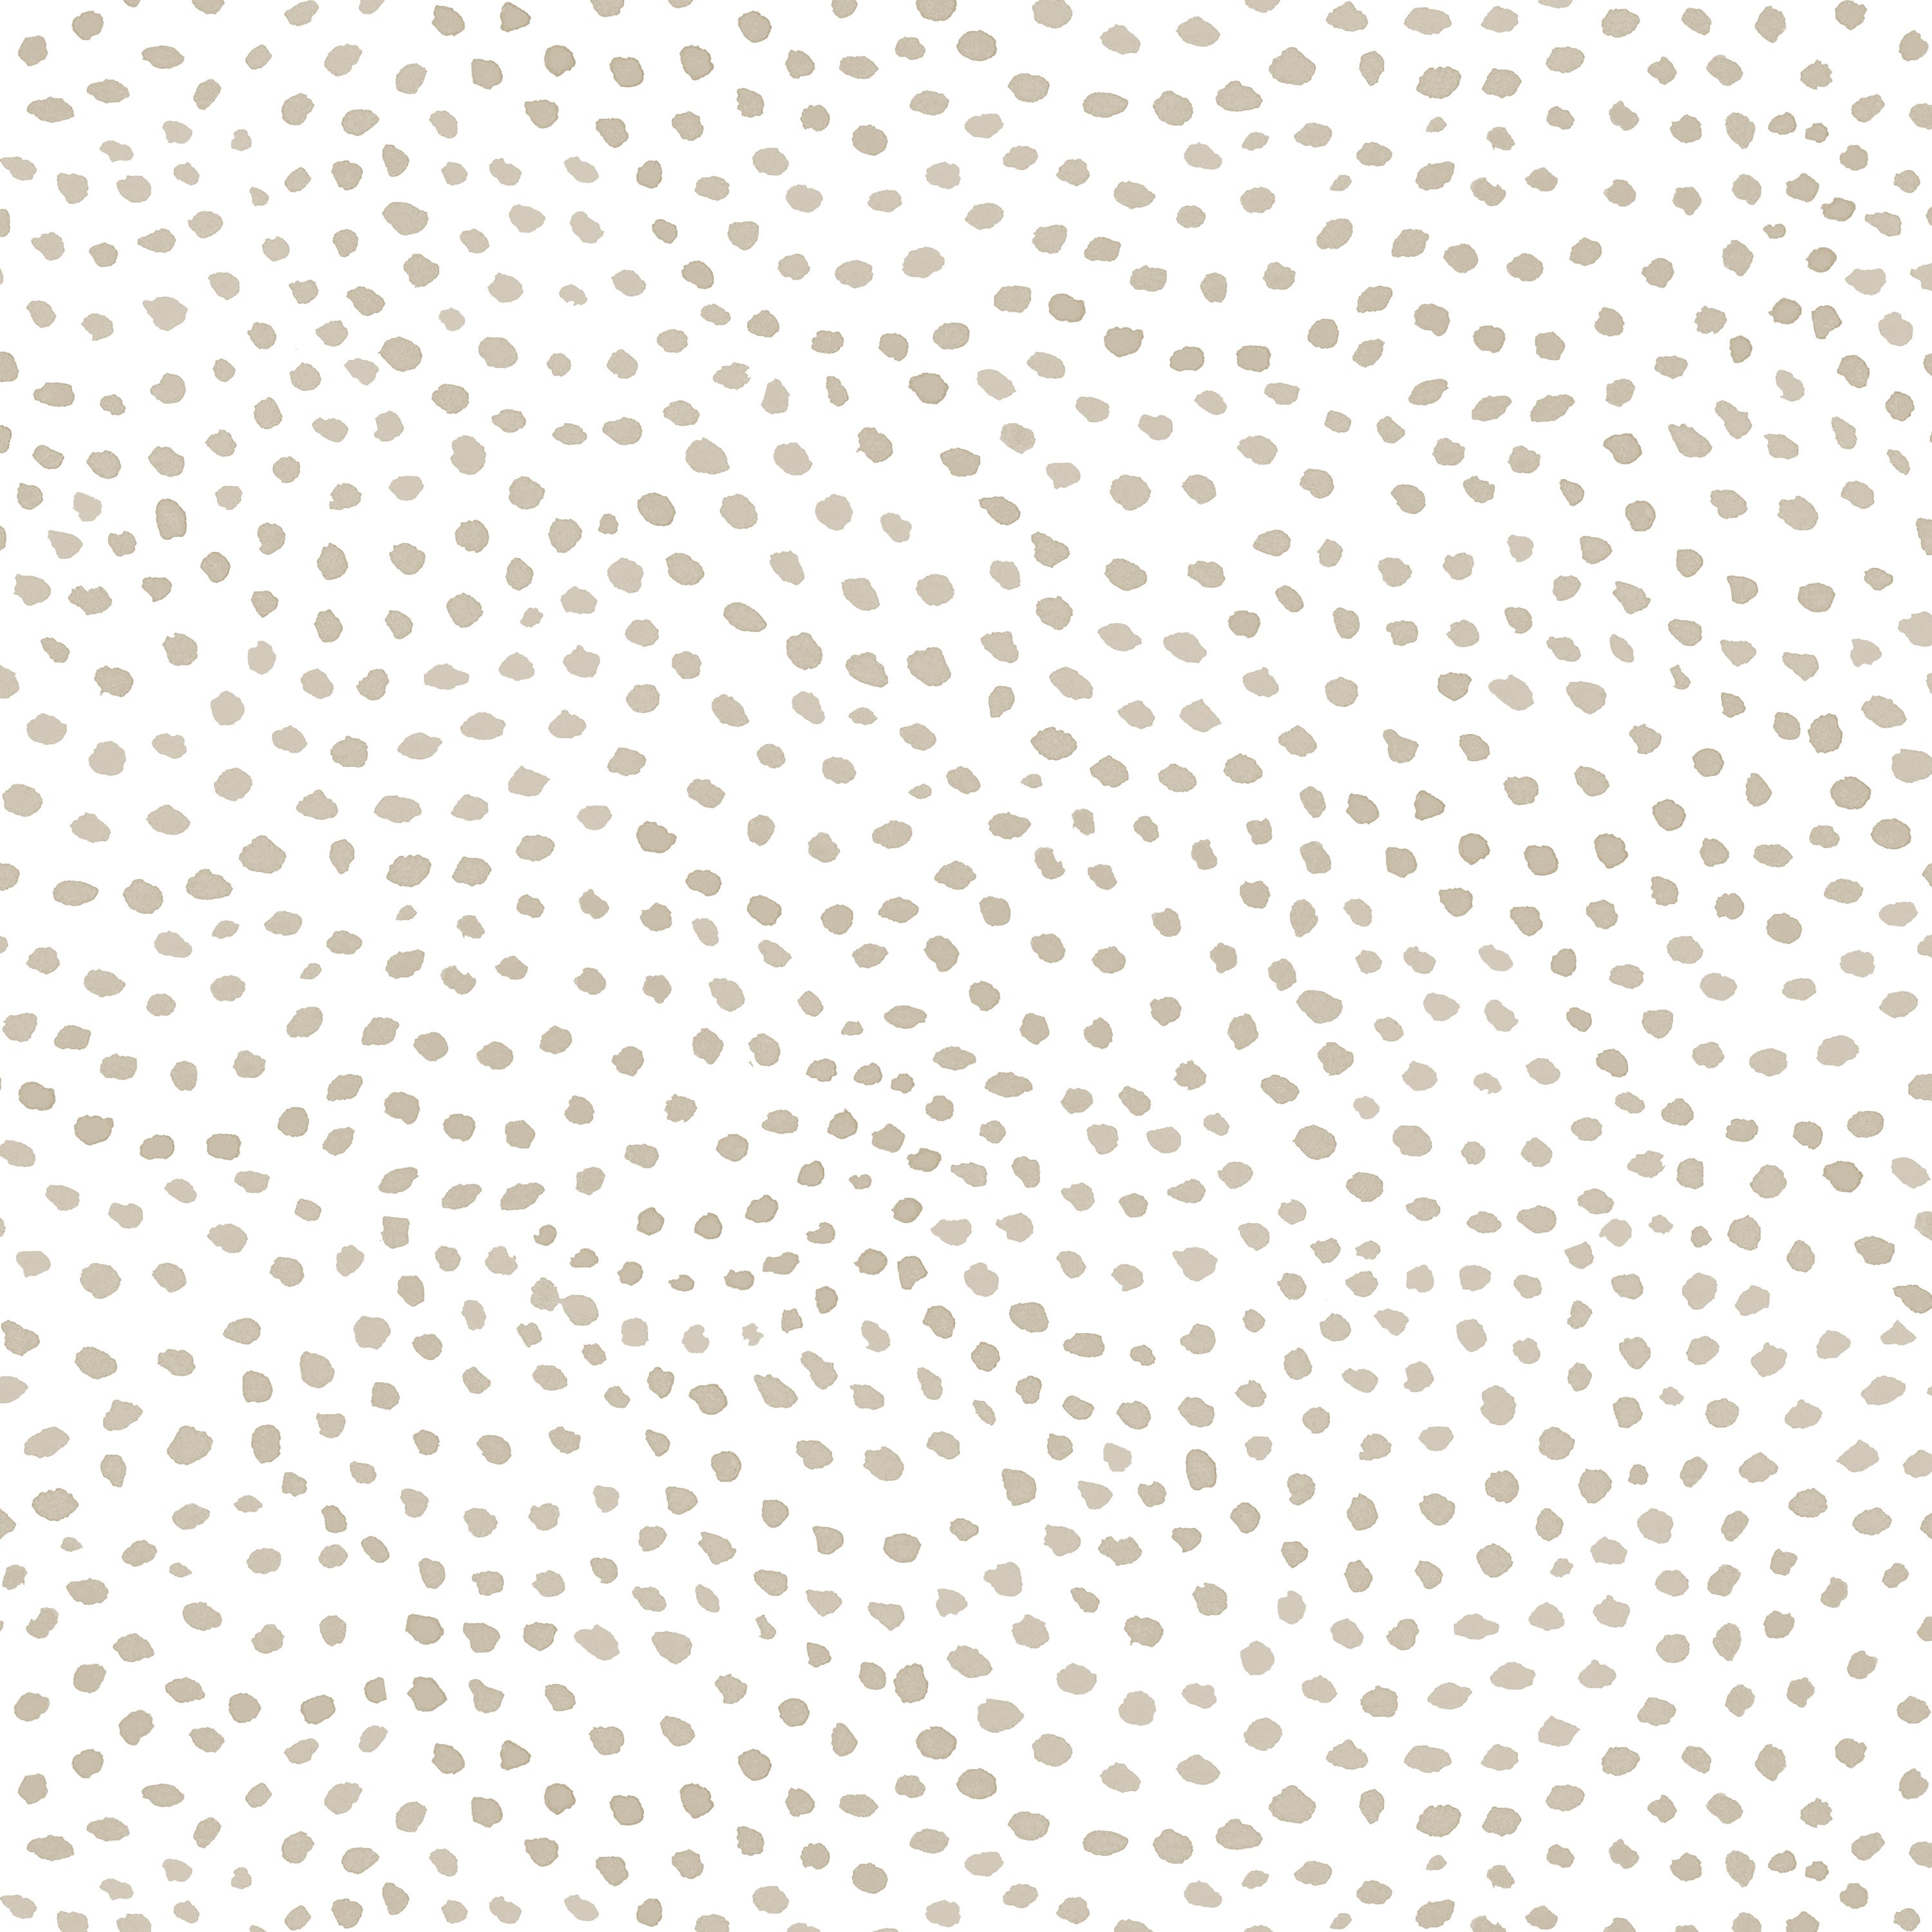 Detail of wallpaper in a scalloped dot print in tan on a white field.